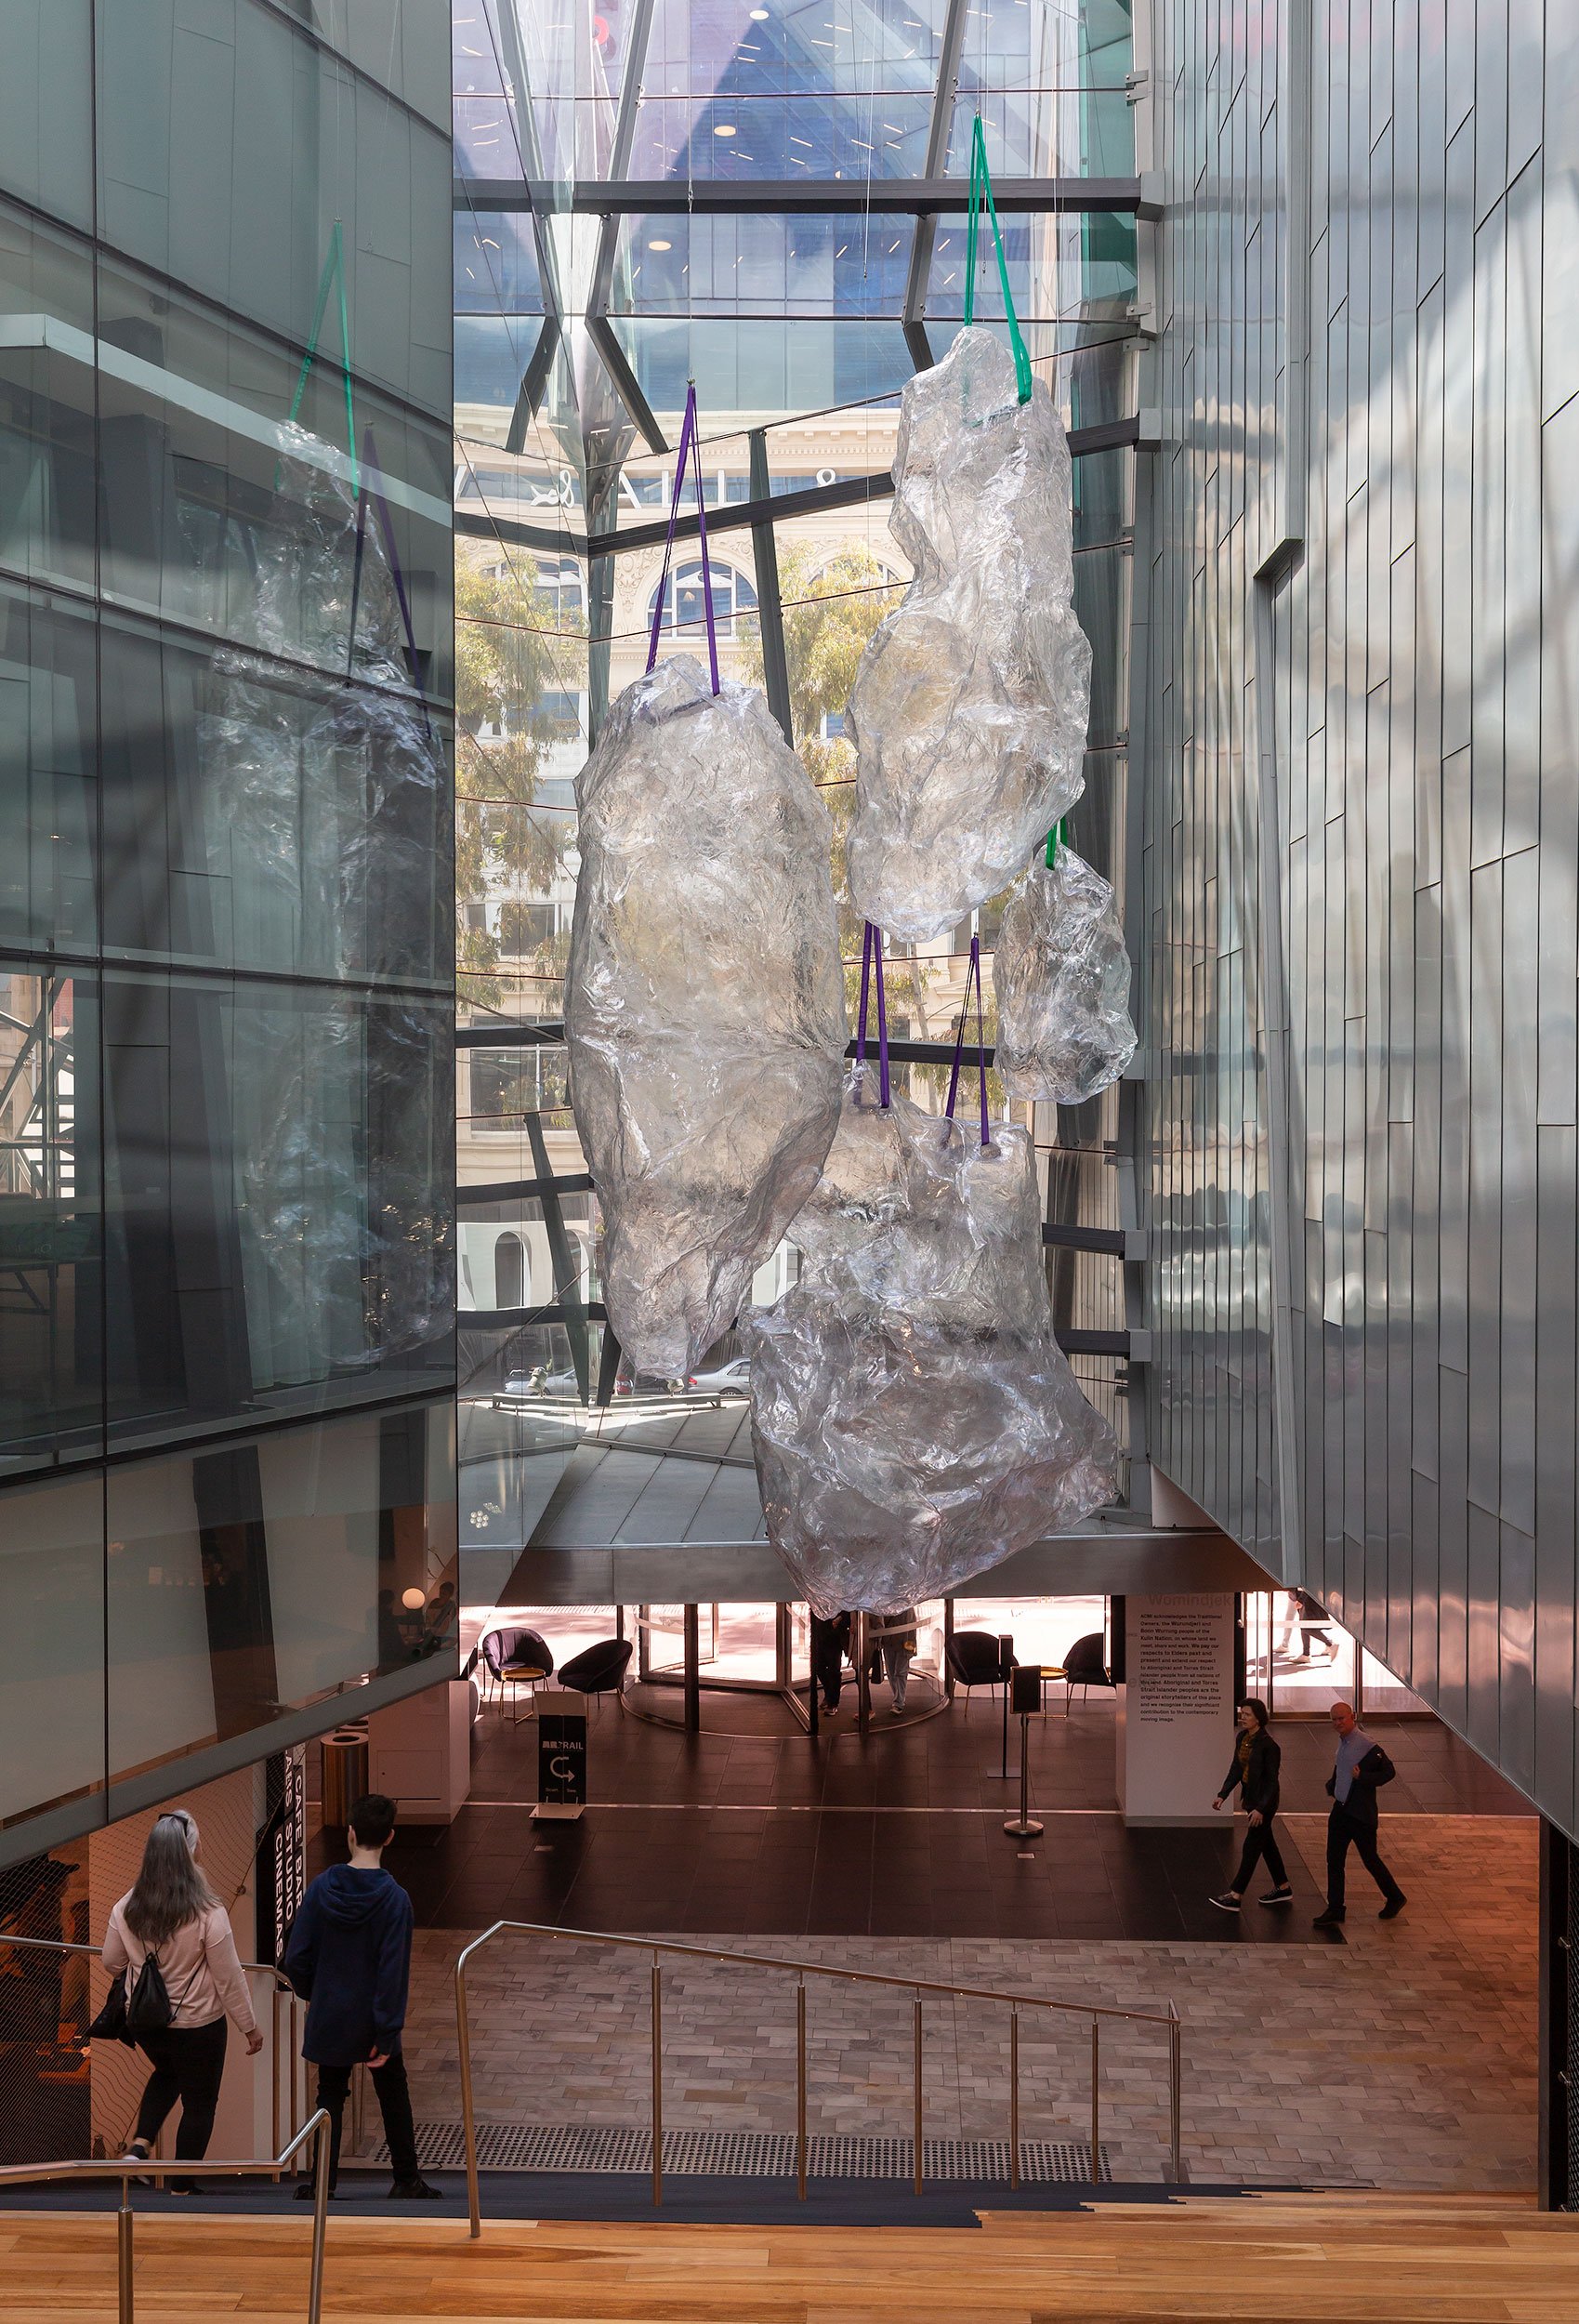 Mikala Dwyer, Weights of Light, 2022, ACMI, Melbourne